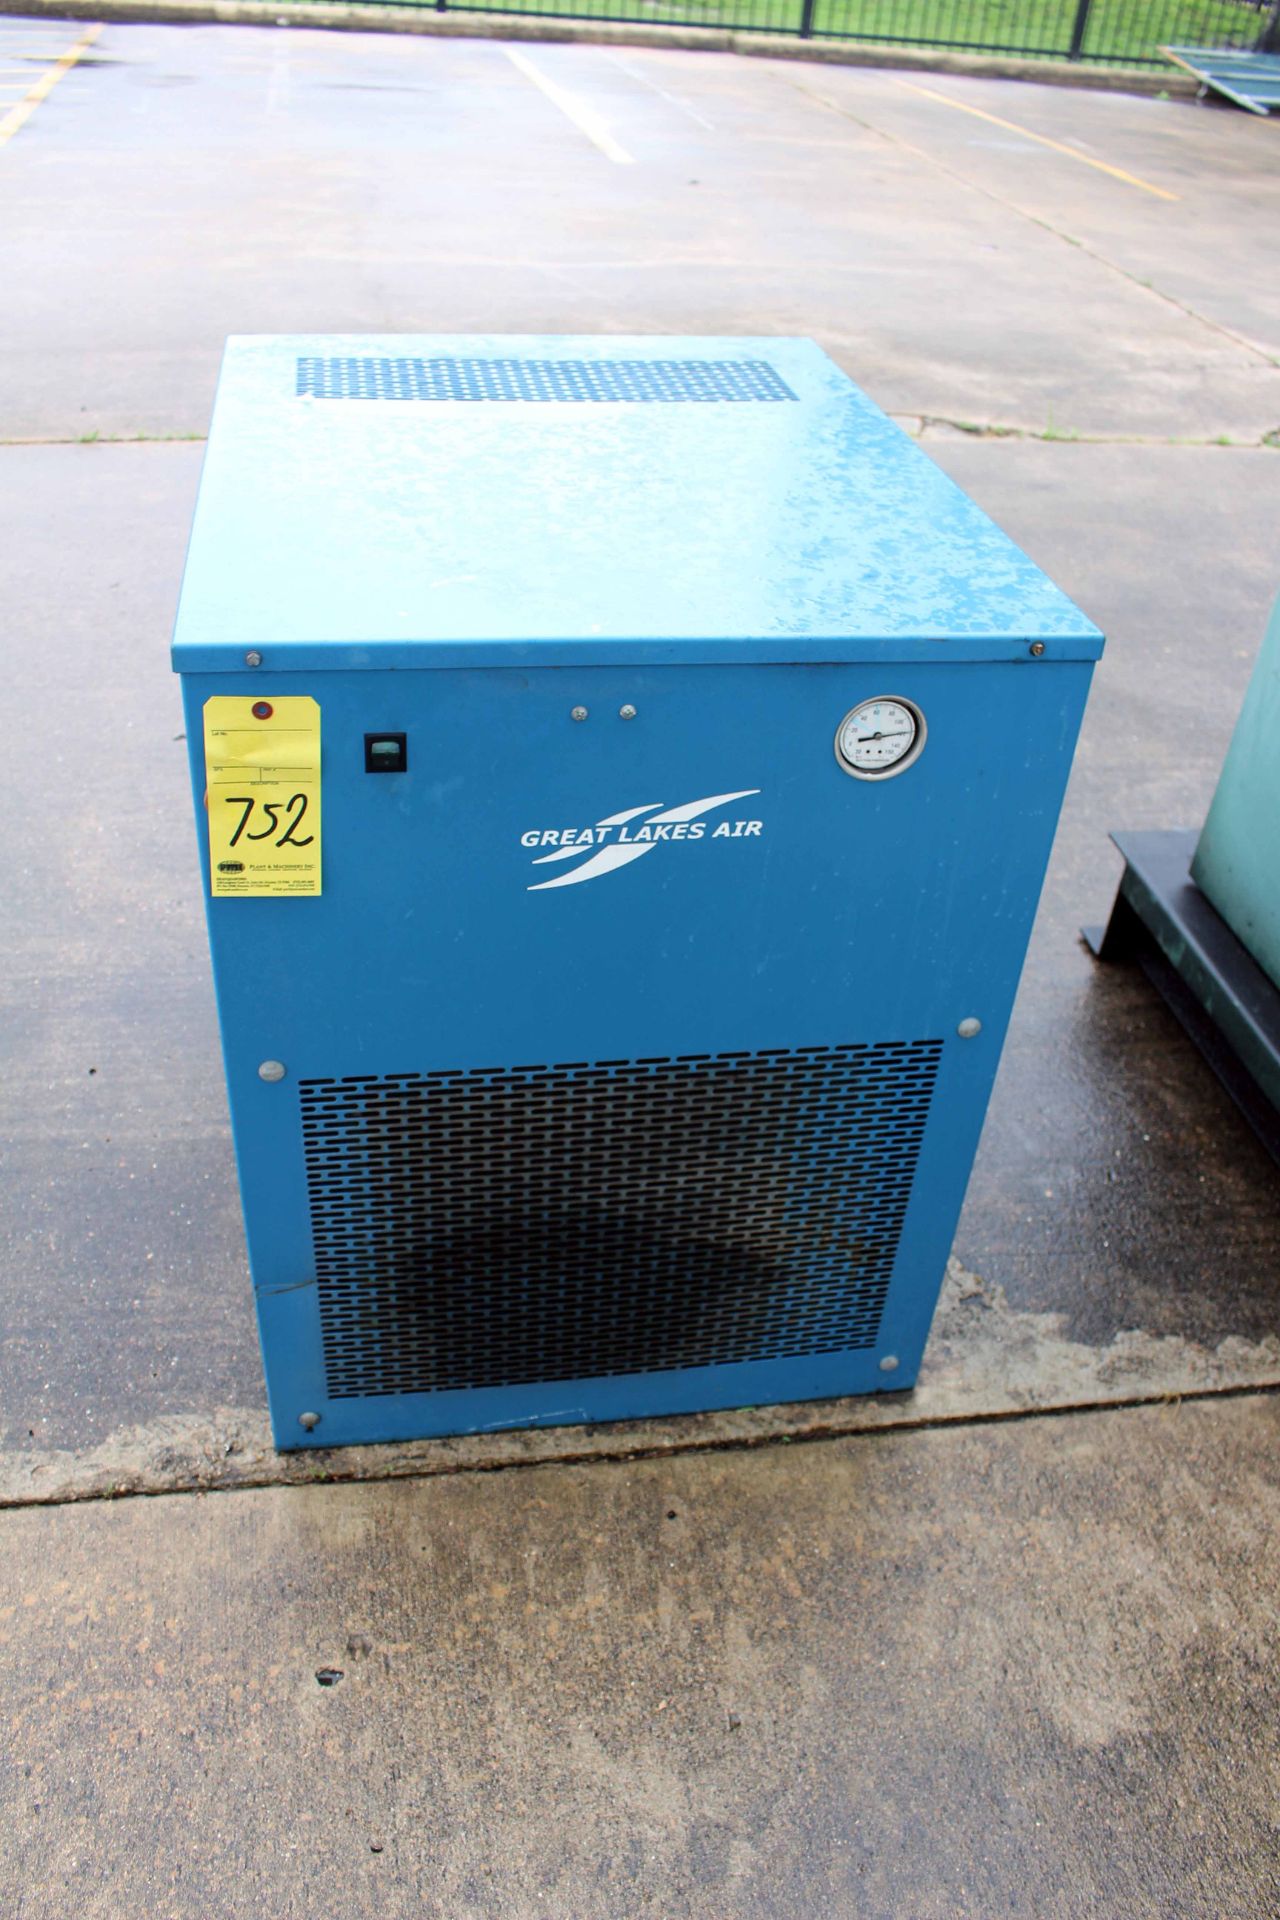 REFRIGERATED AIR DRYER, GREAT LAKES AIR 150, S/N 31867